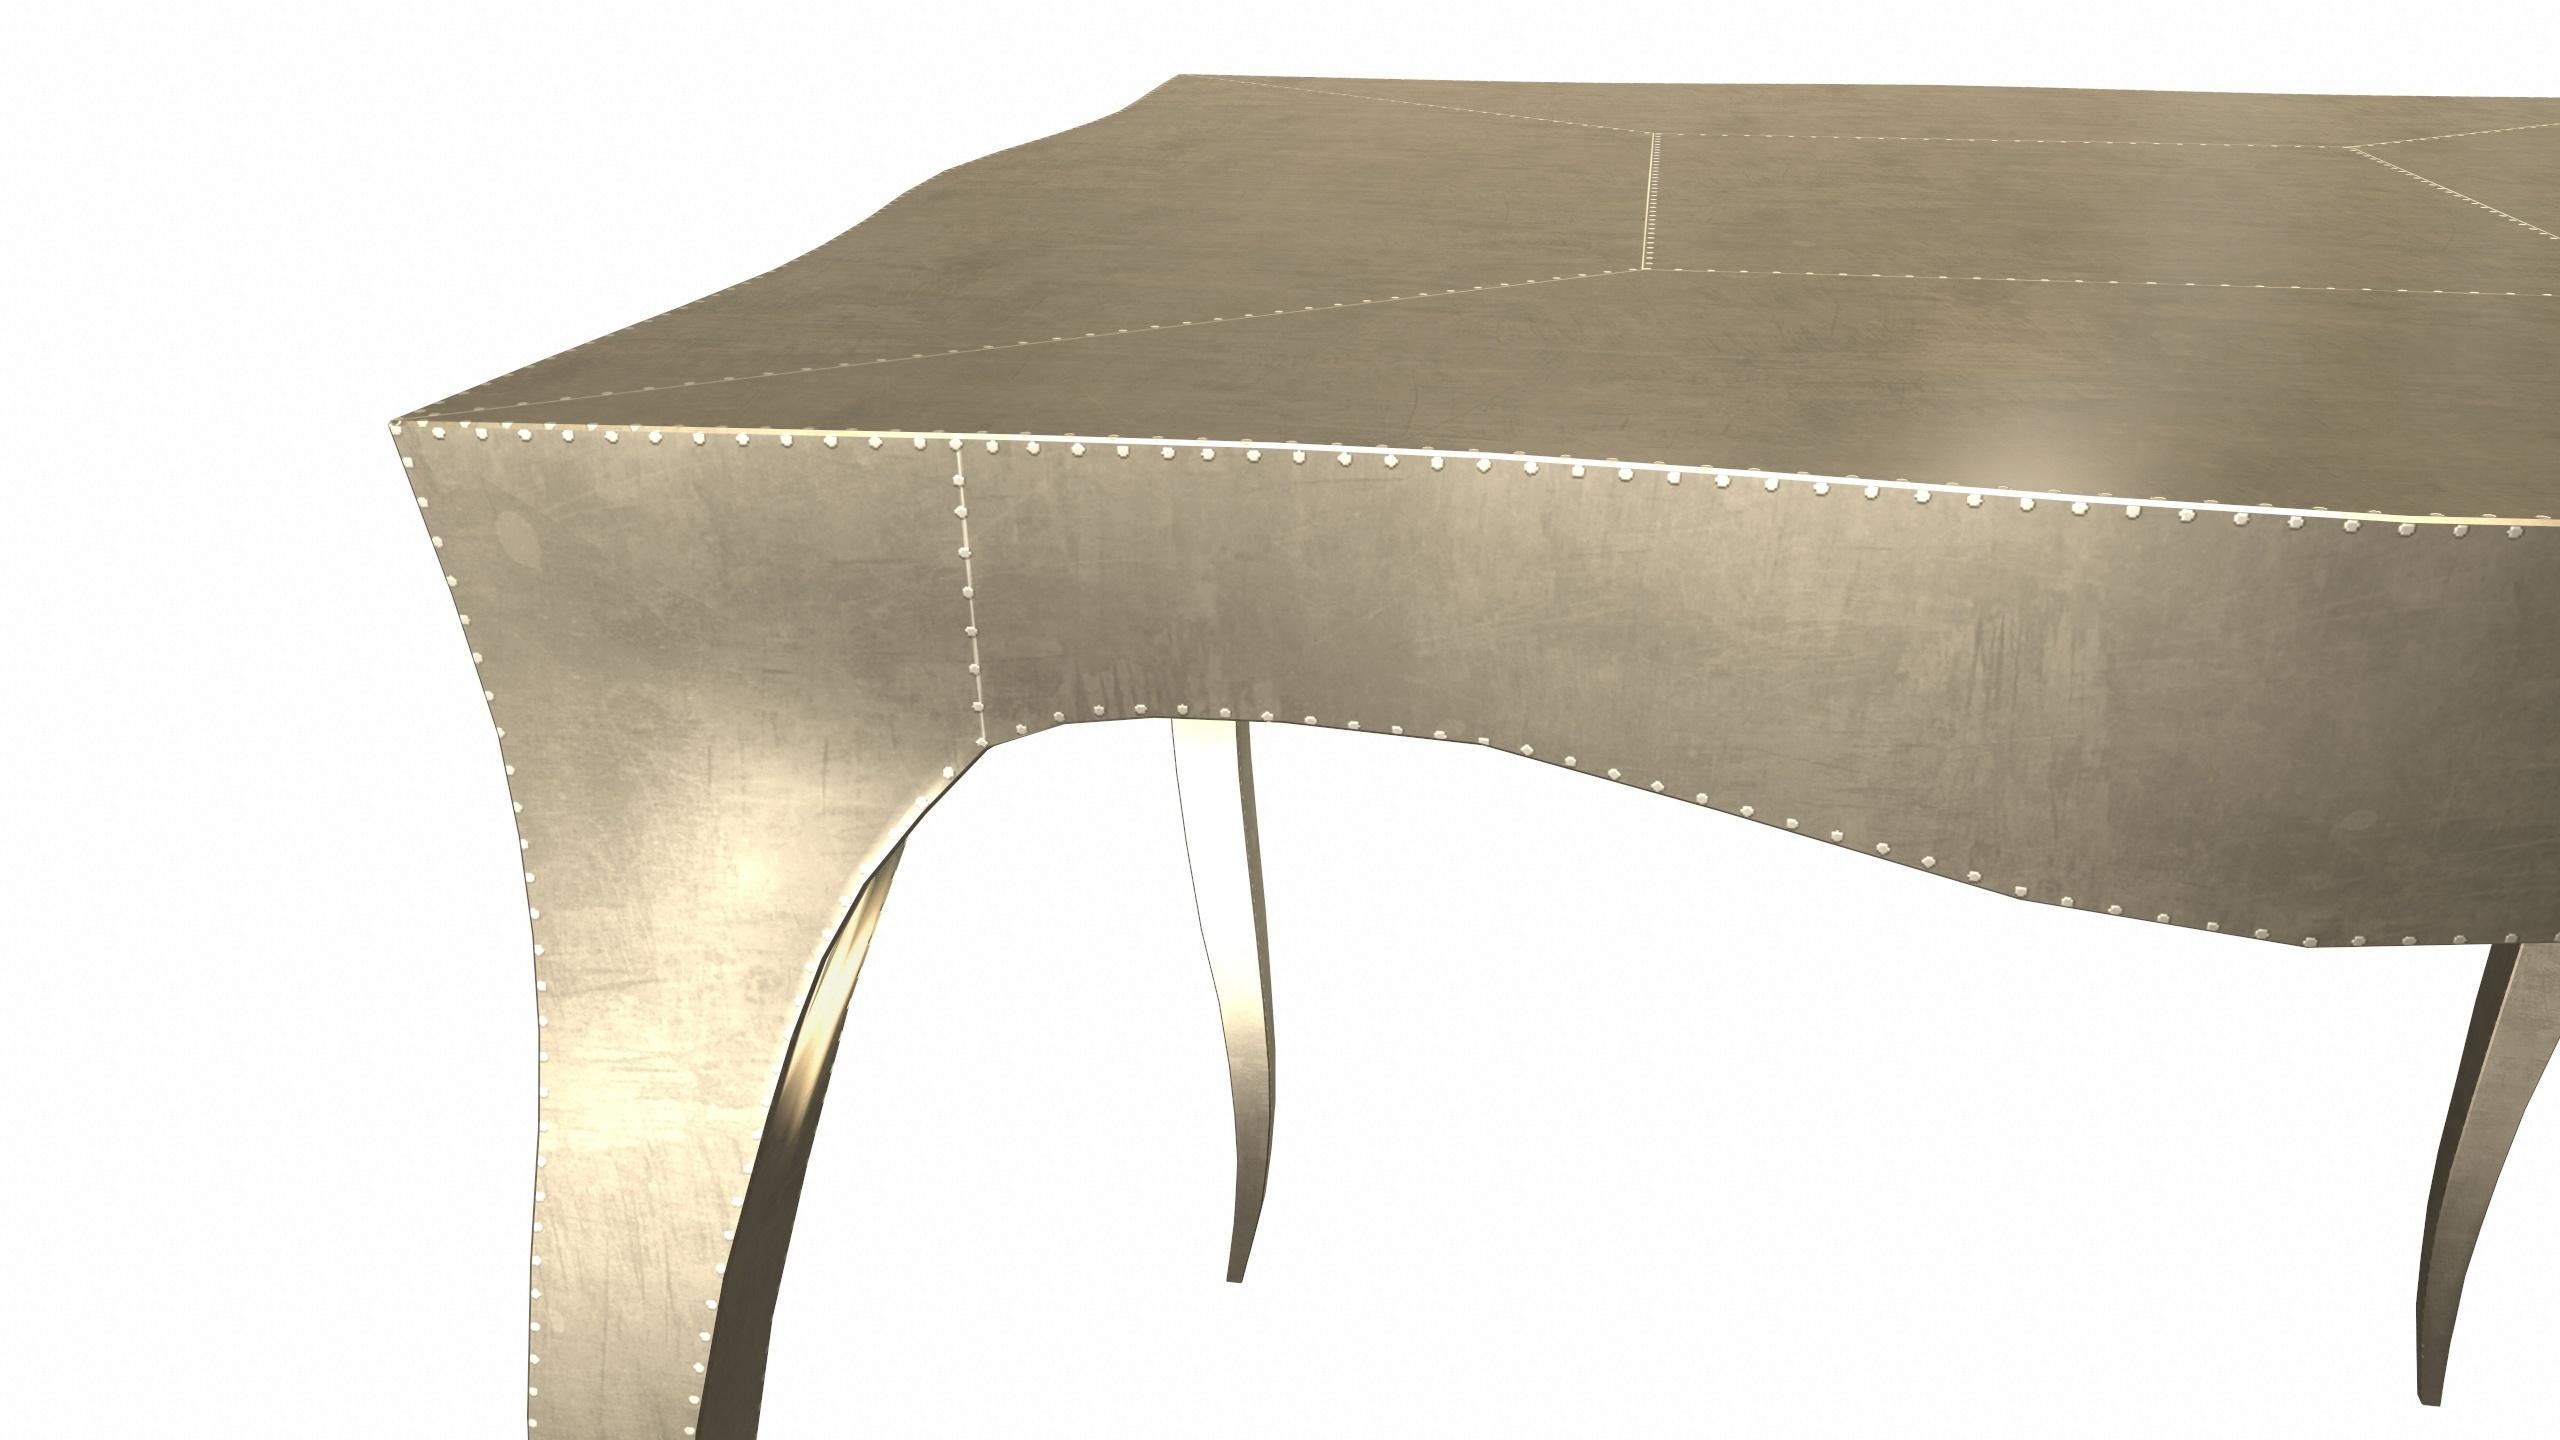 American Louise Art Deco Center Tables Smooth Brass by Paul Mathieu for S. Odegard For Sale